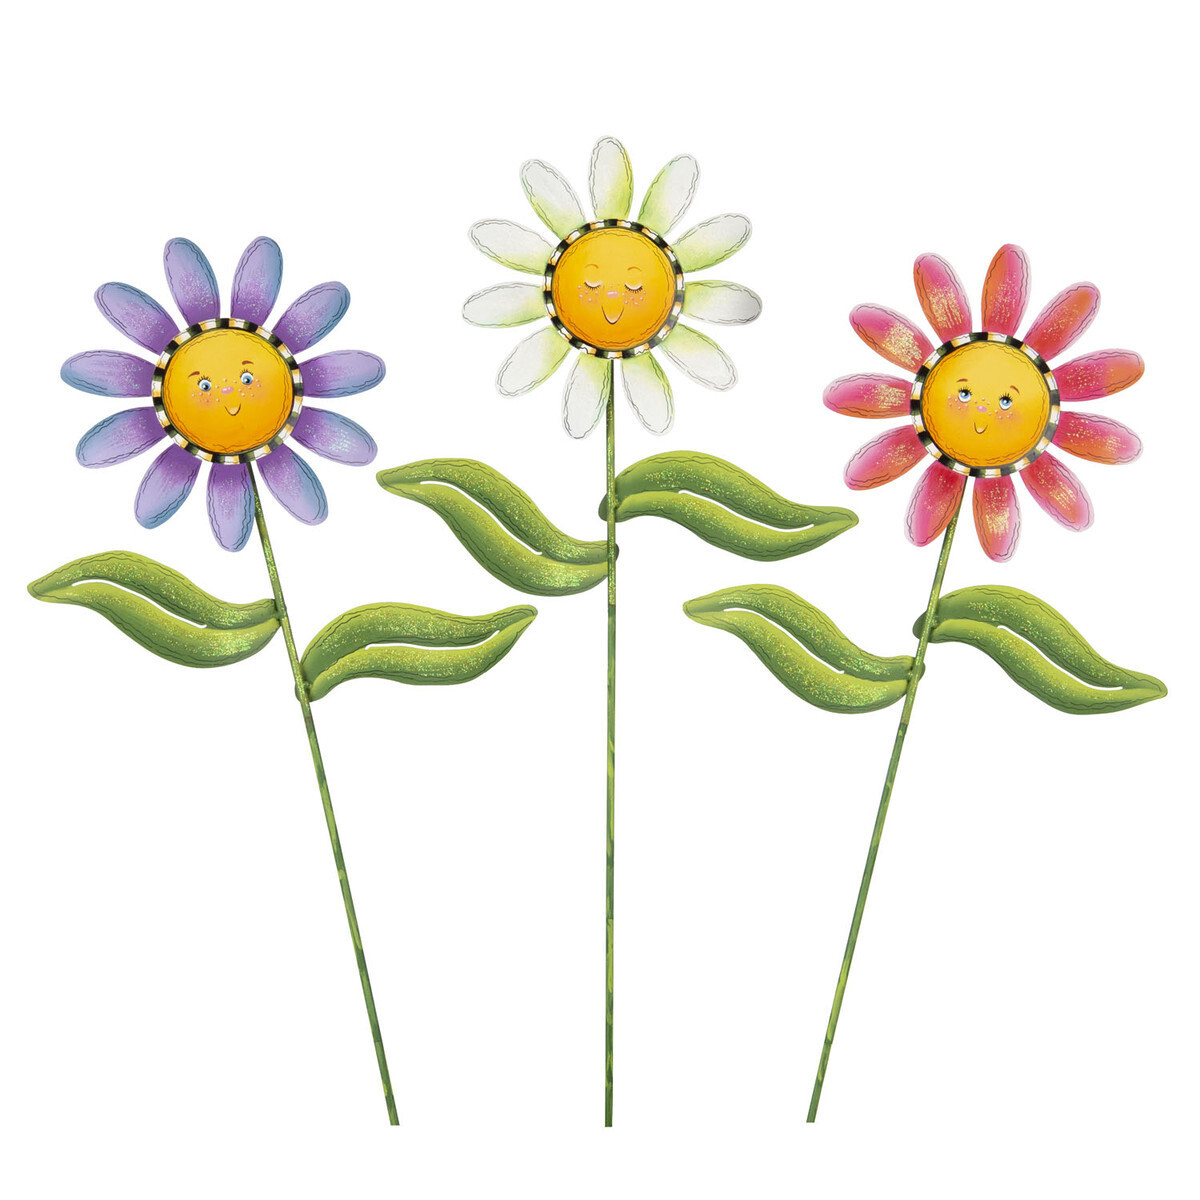 Round Top Collection Love Daisies With Faces Stake